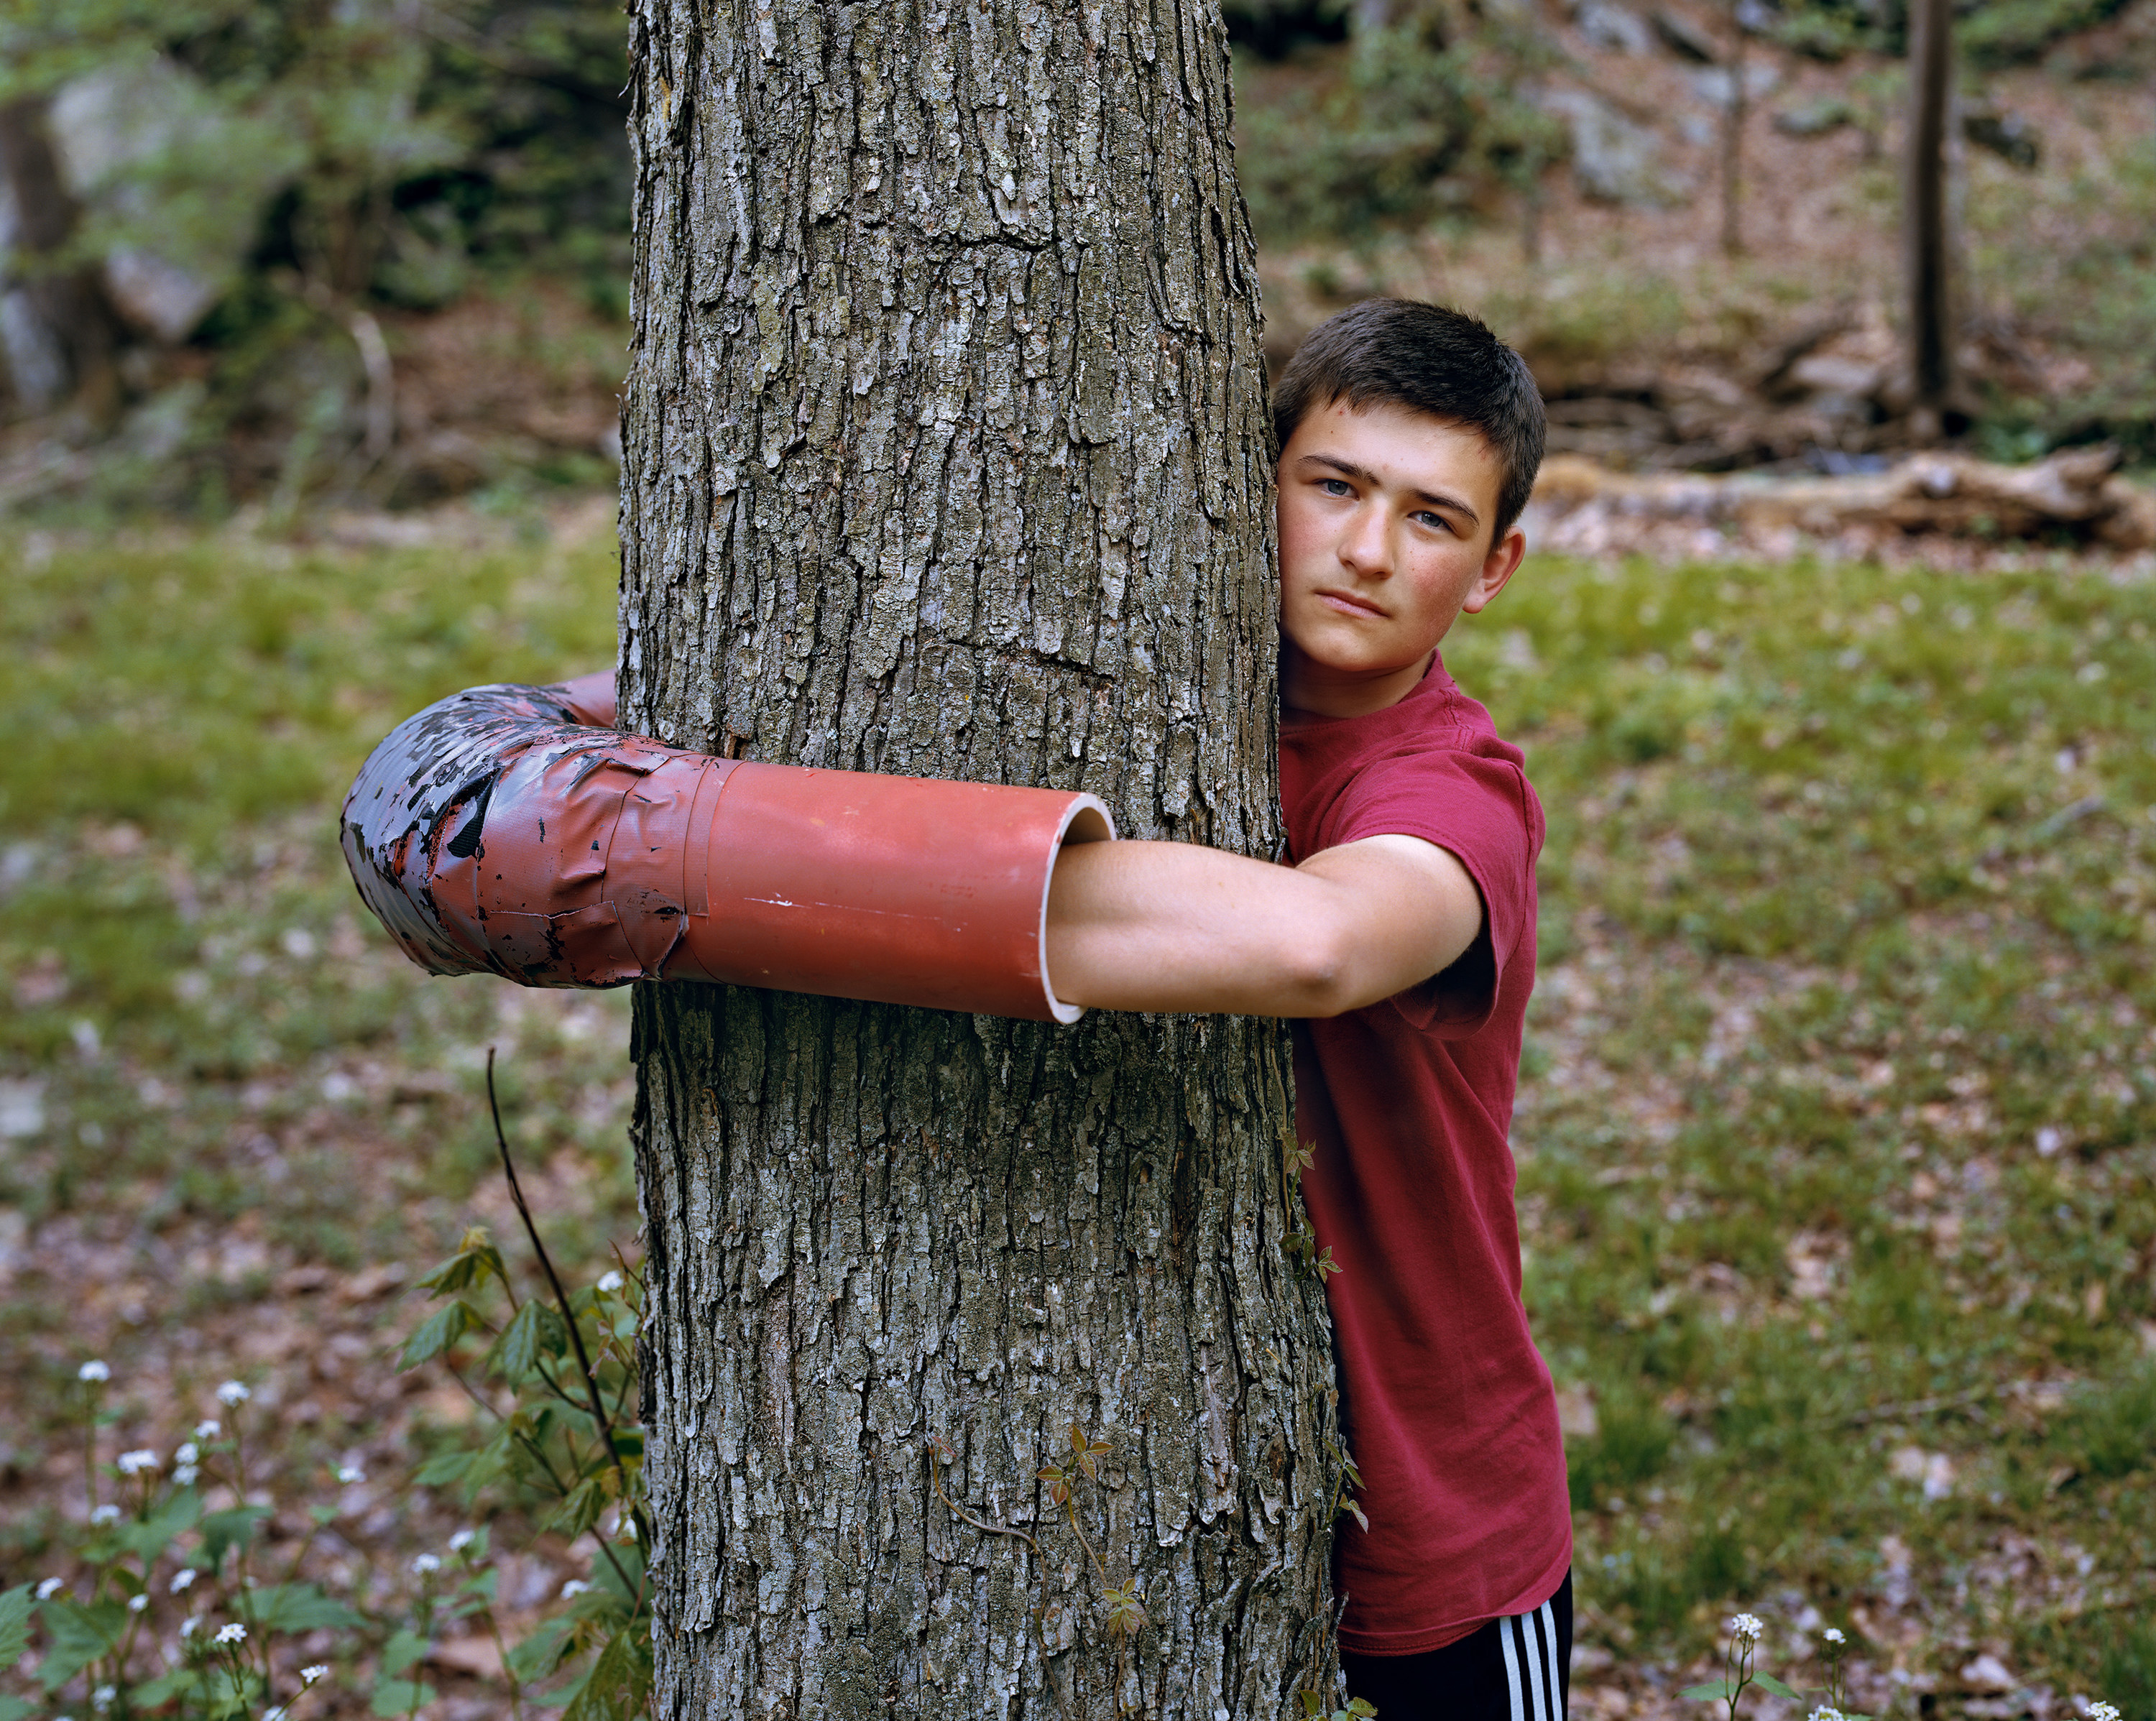 Mitch Epstein, &quot;Ashton Clatterbuck, Lancaster County, Pennsylvania,&quot; showing a young man standing and embracing a tree trunk